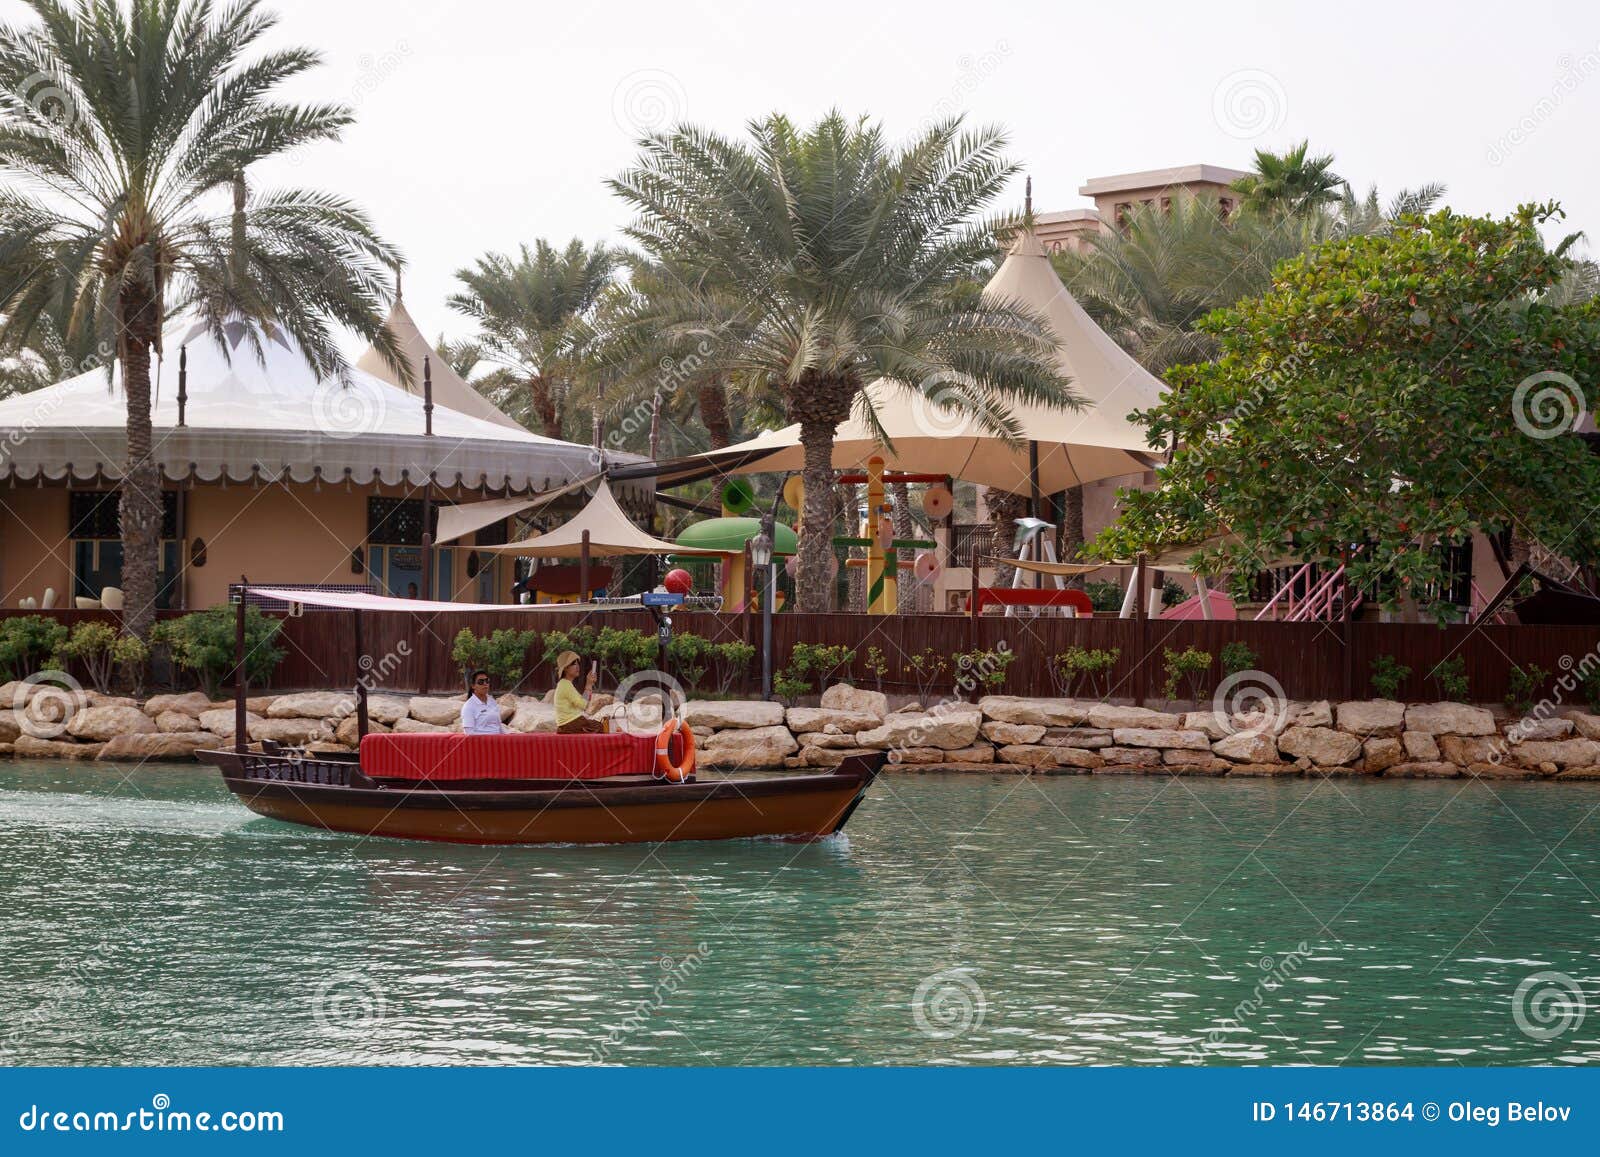 Traditional Wooden Arabic Boat With Tourists Sails On 